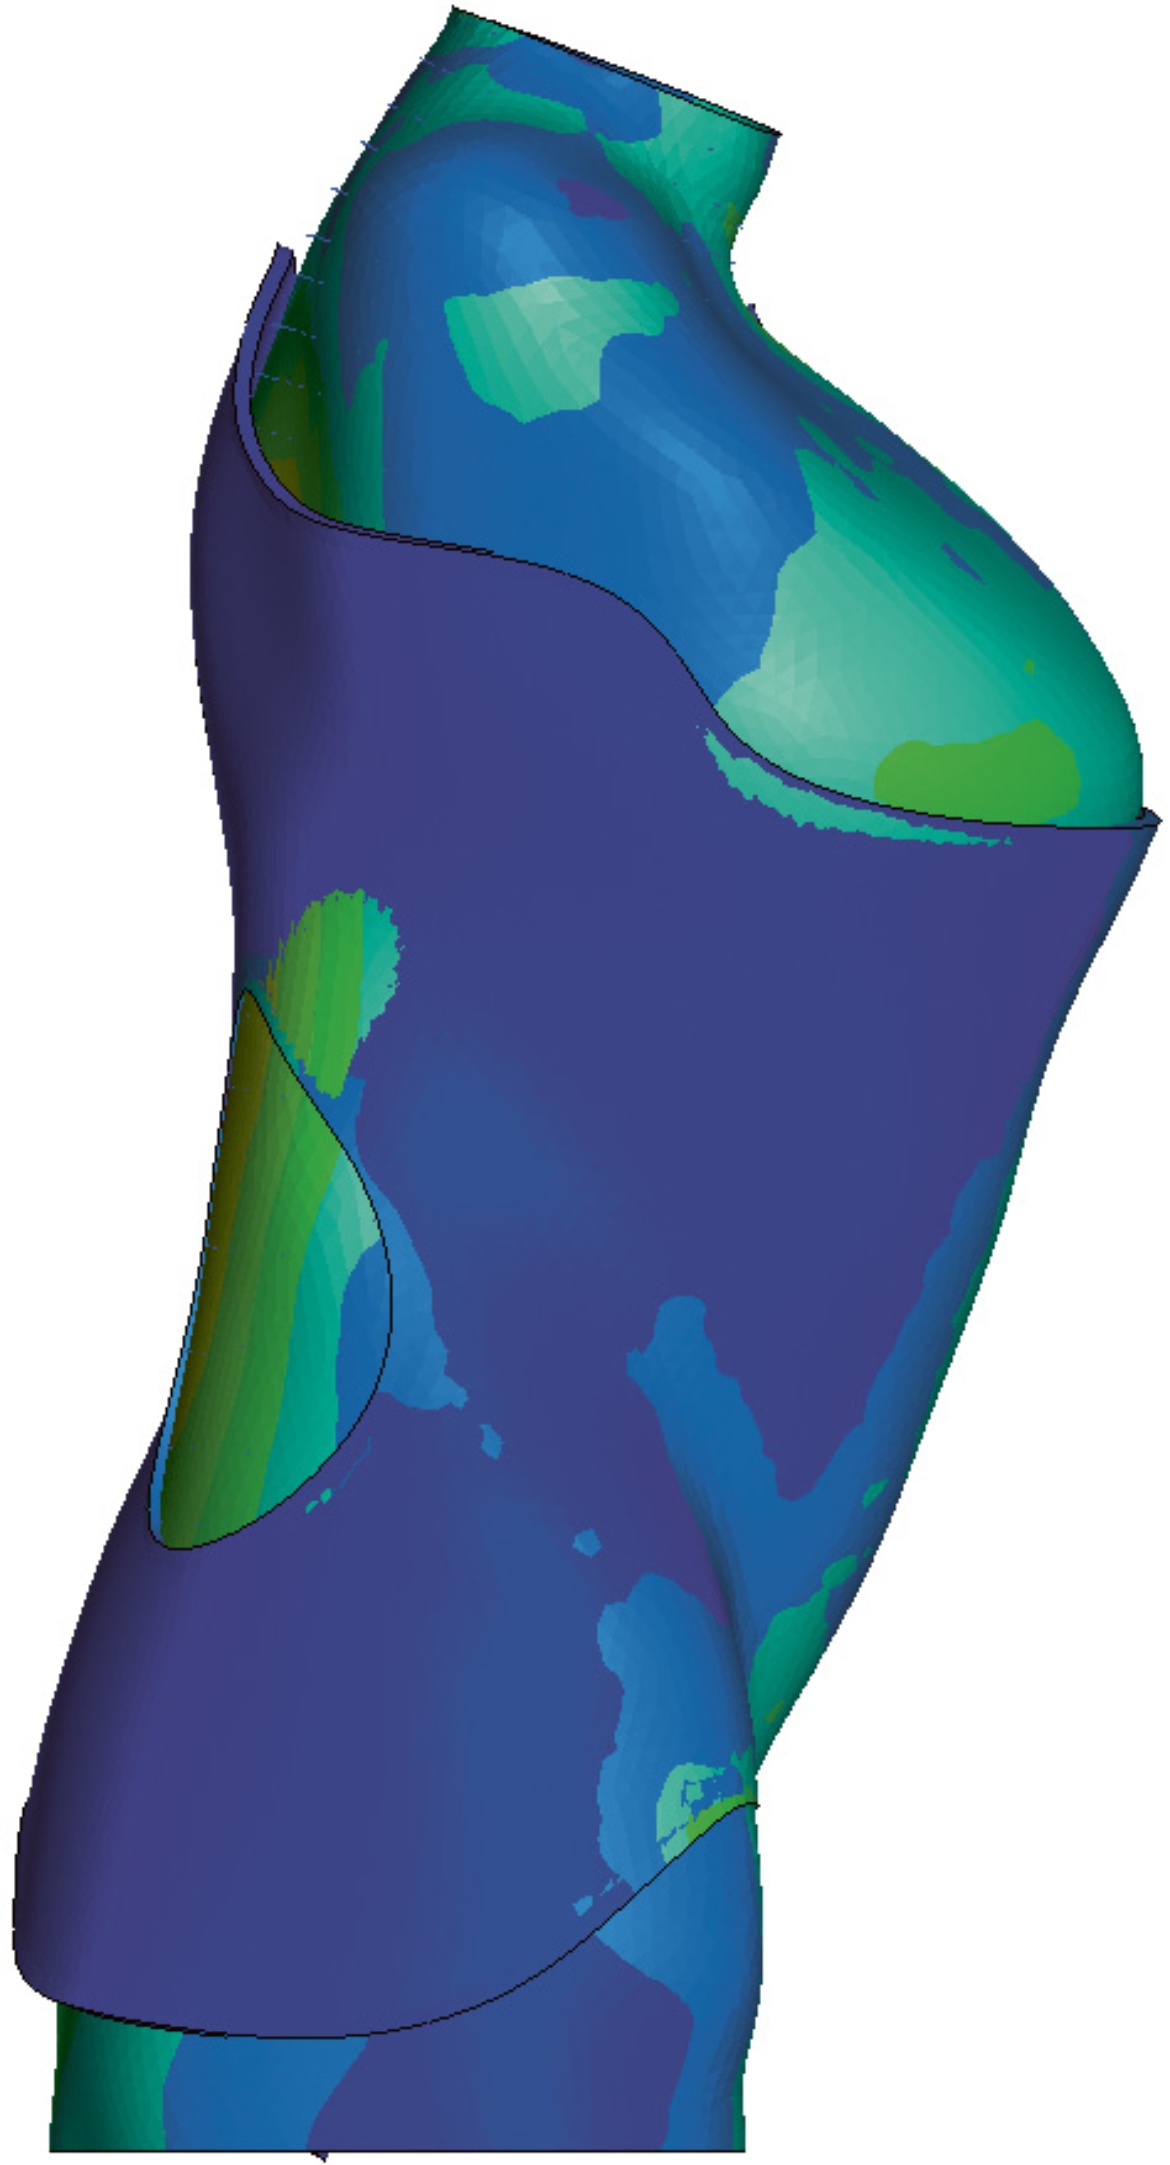 Simulation of an upper body wearing a corset